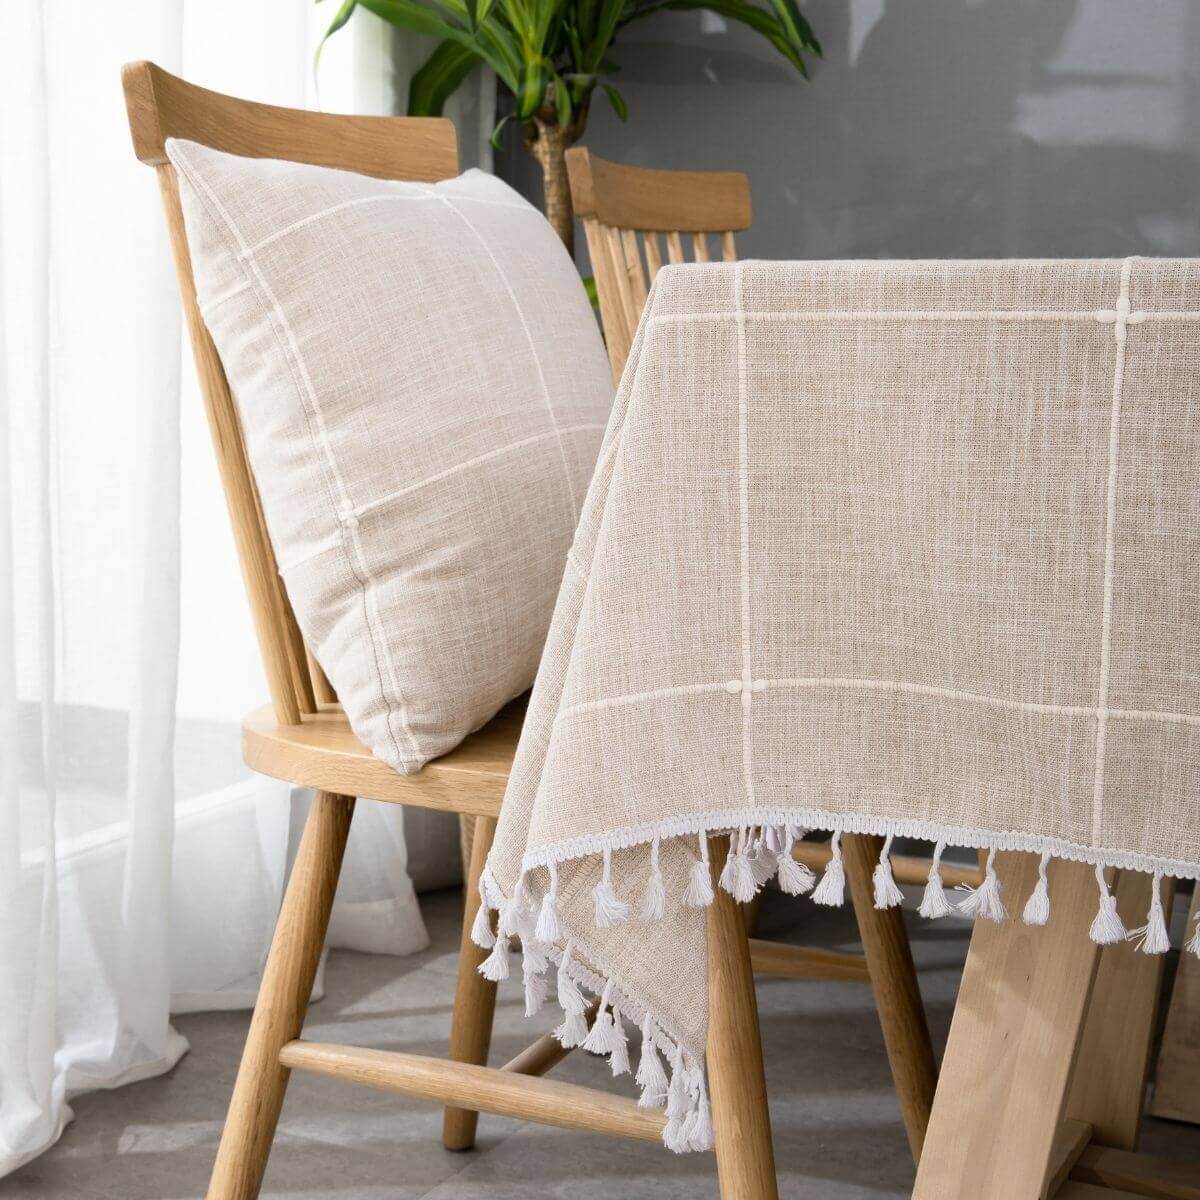 SASTYBALE beige rectangle tablecloths